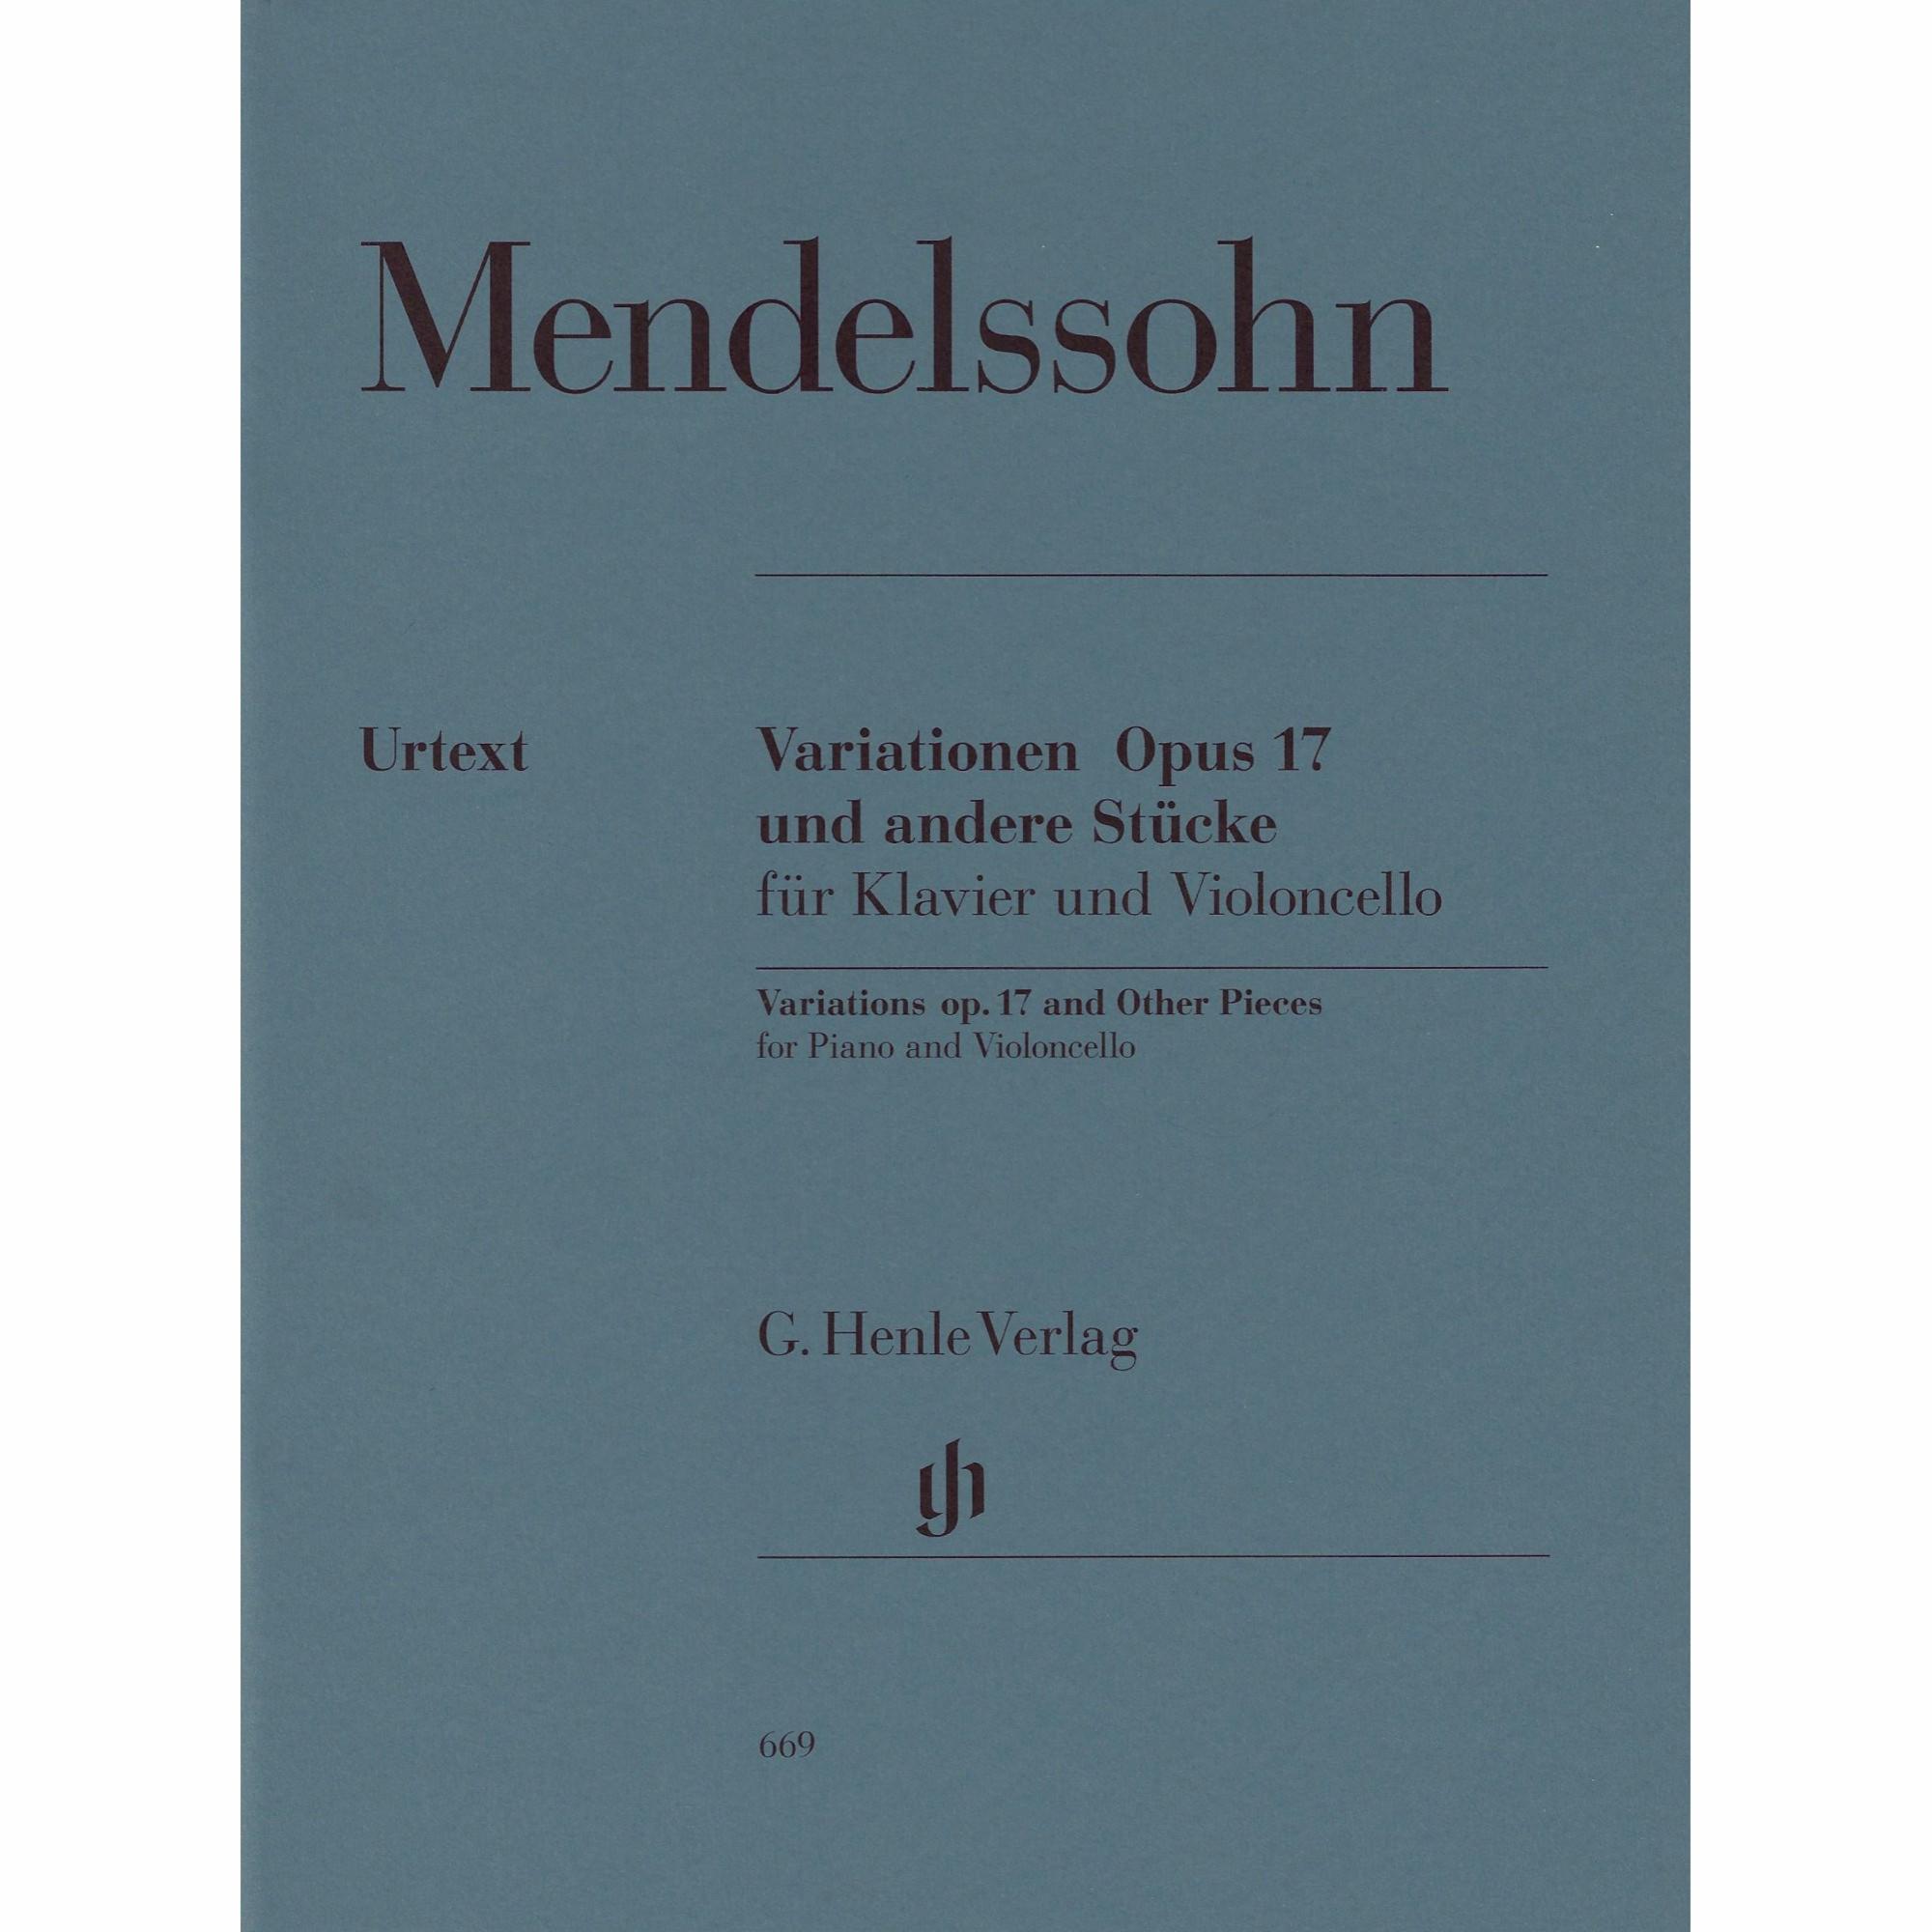 Variations Concertantes, Op. 17 for Cello and Piano